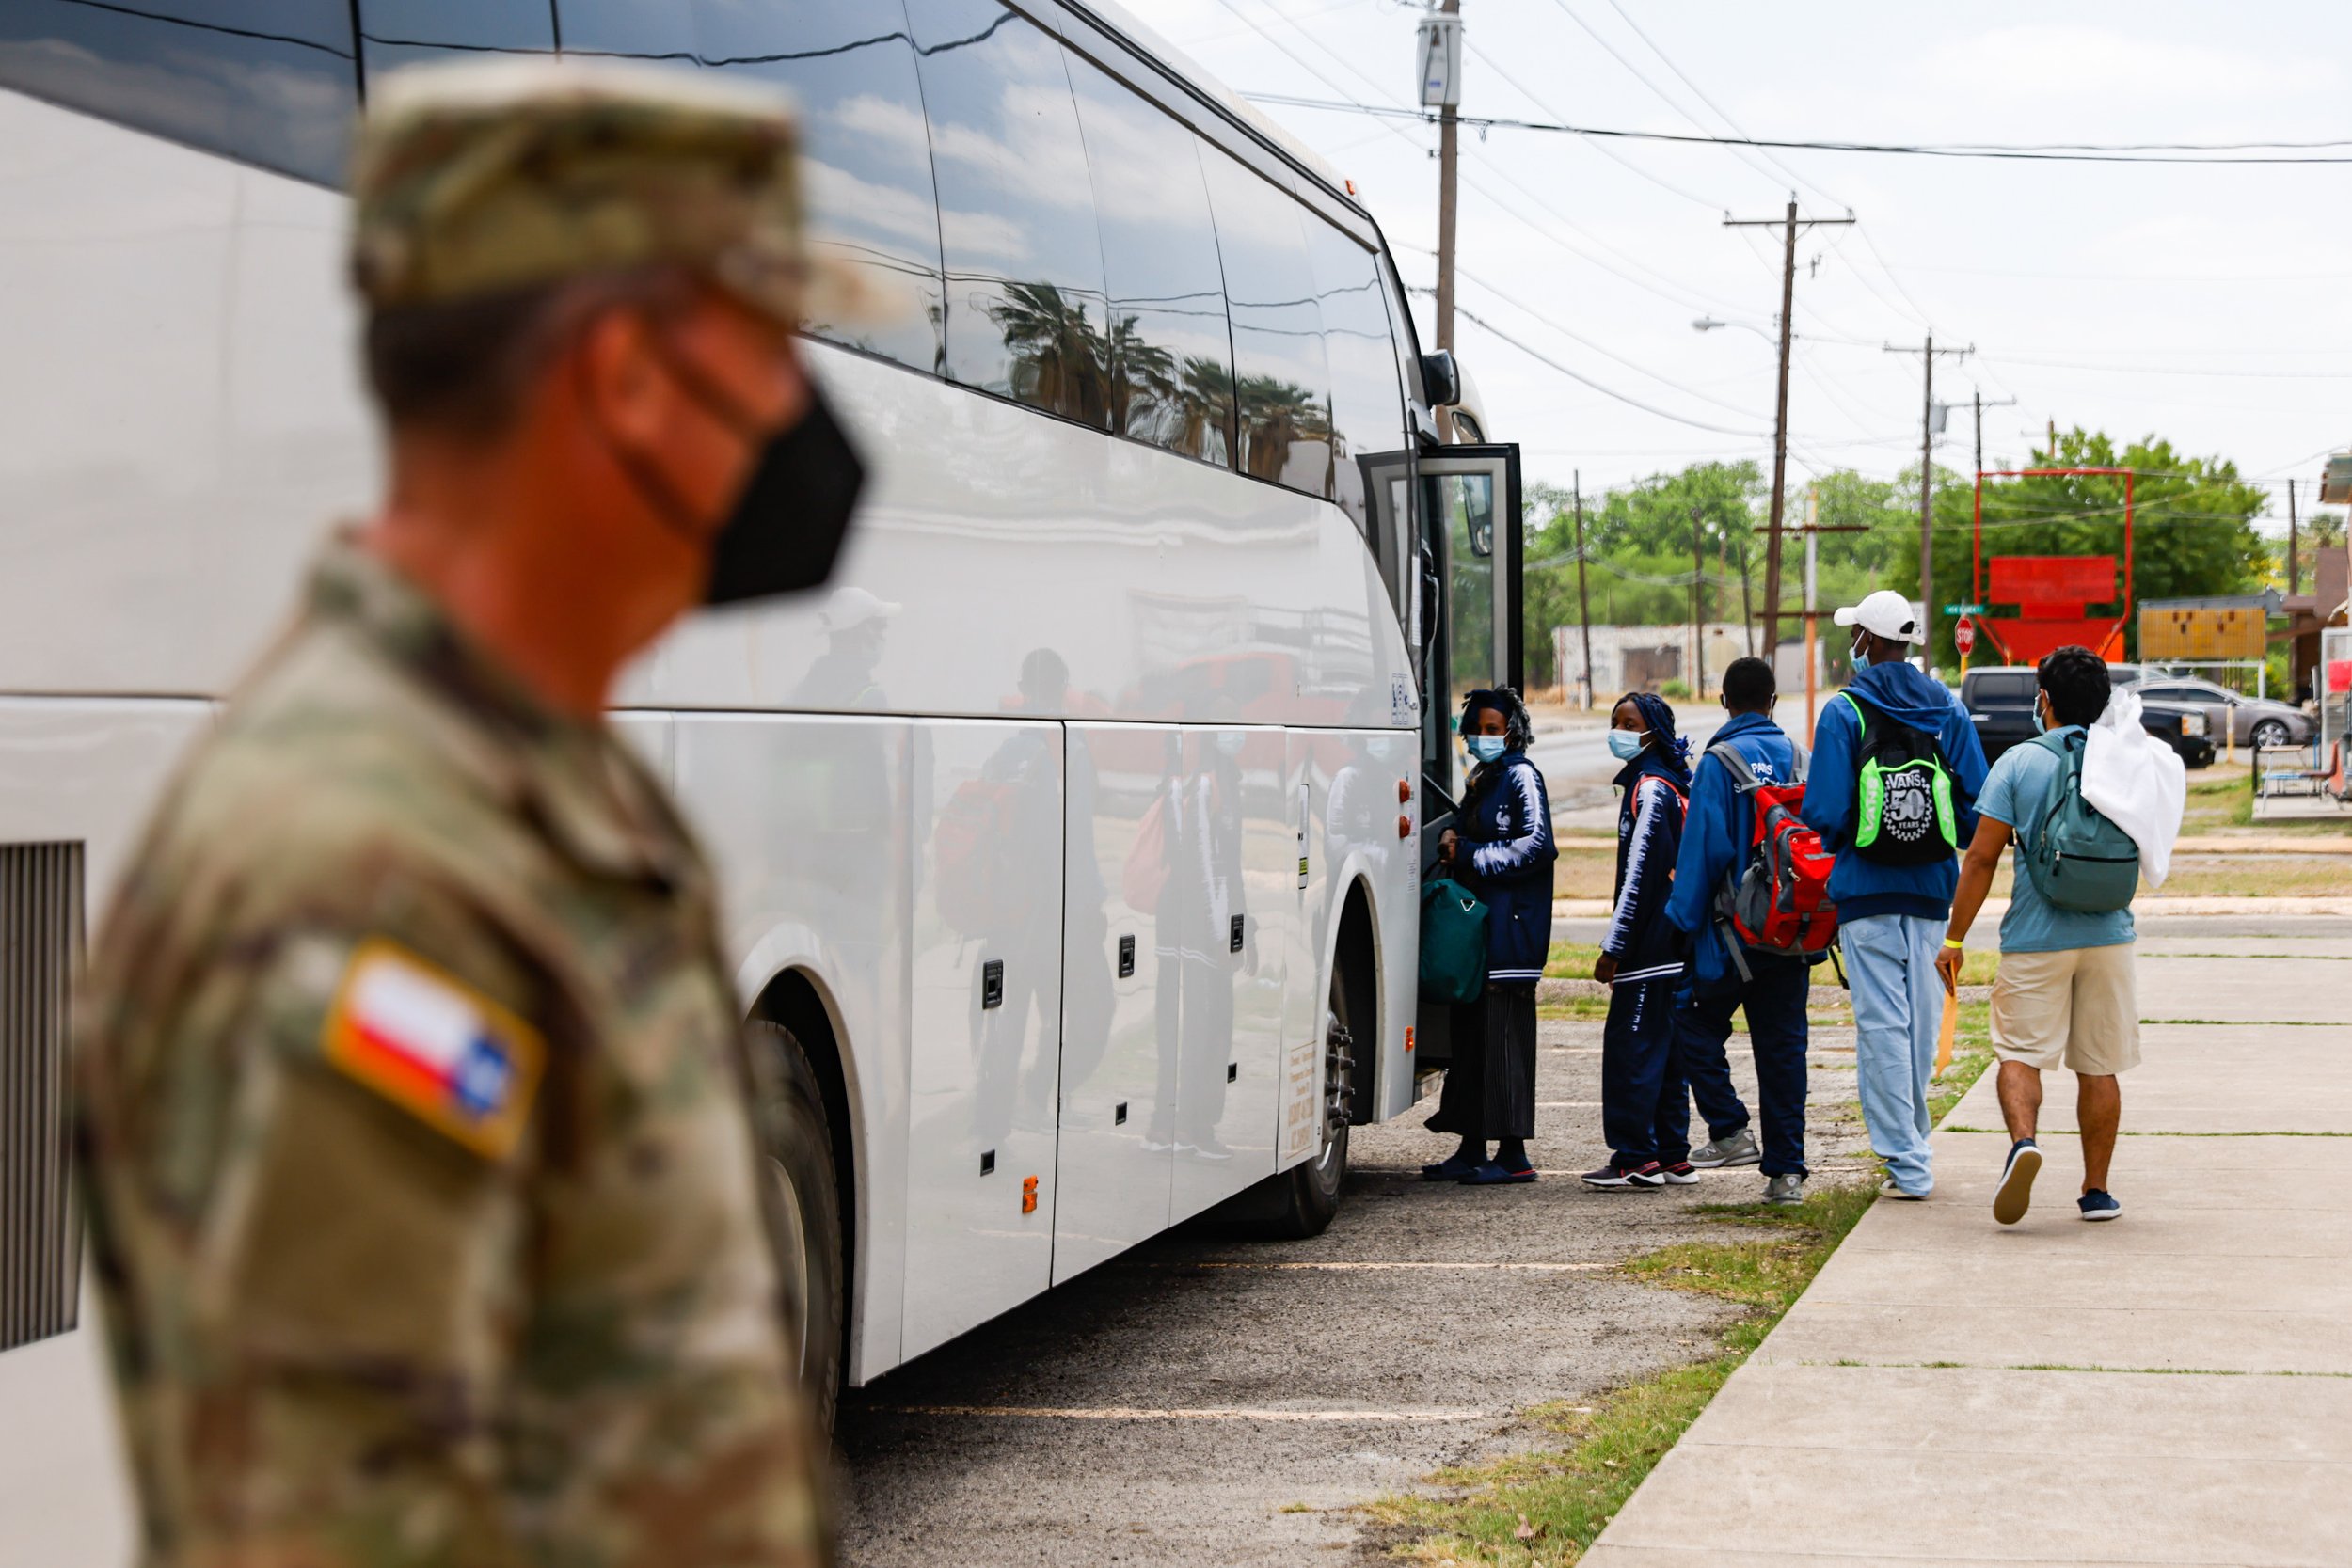  Victor Rodriguez, 26, walks to get on the bus that will take him along with other migrants to the East coast in Del Rio, Texas on Wednesday, April 20, 2022. Rodriguez, originally from Venezuela, requested to be part of those who are using the servic